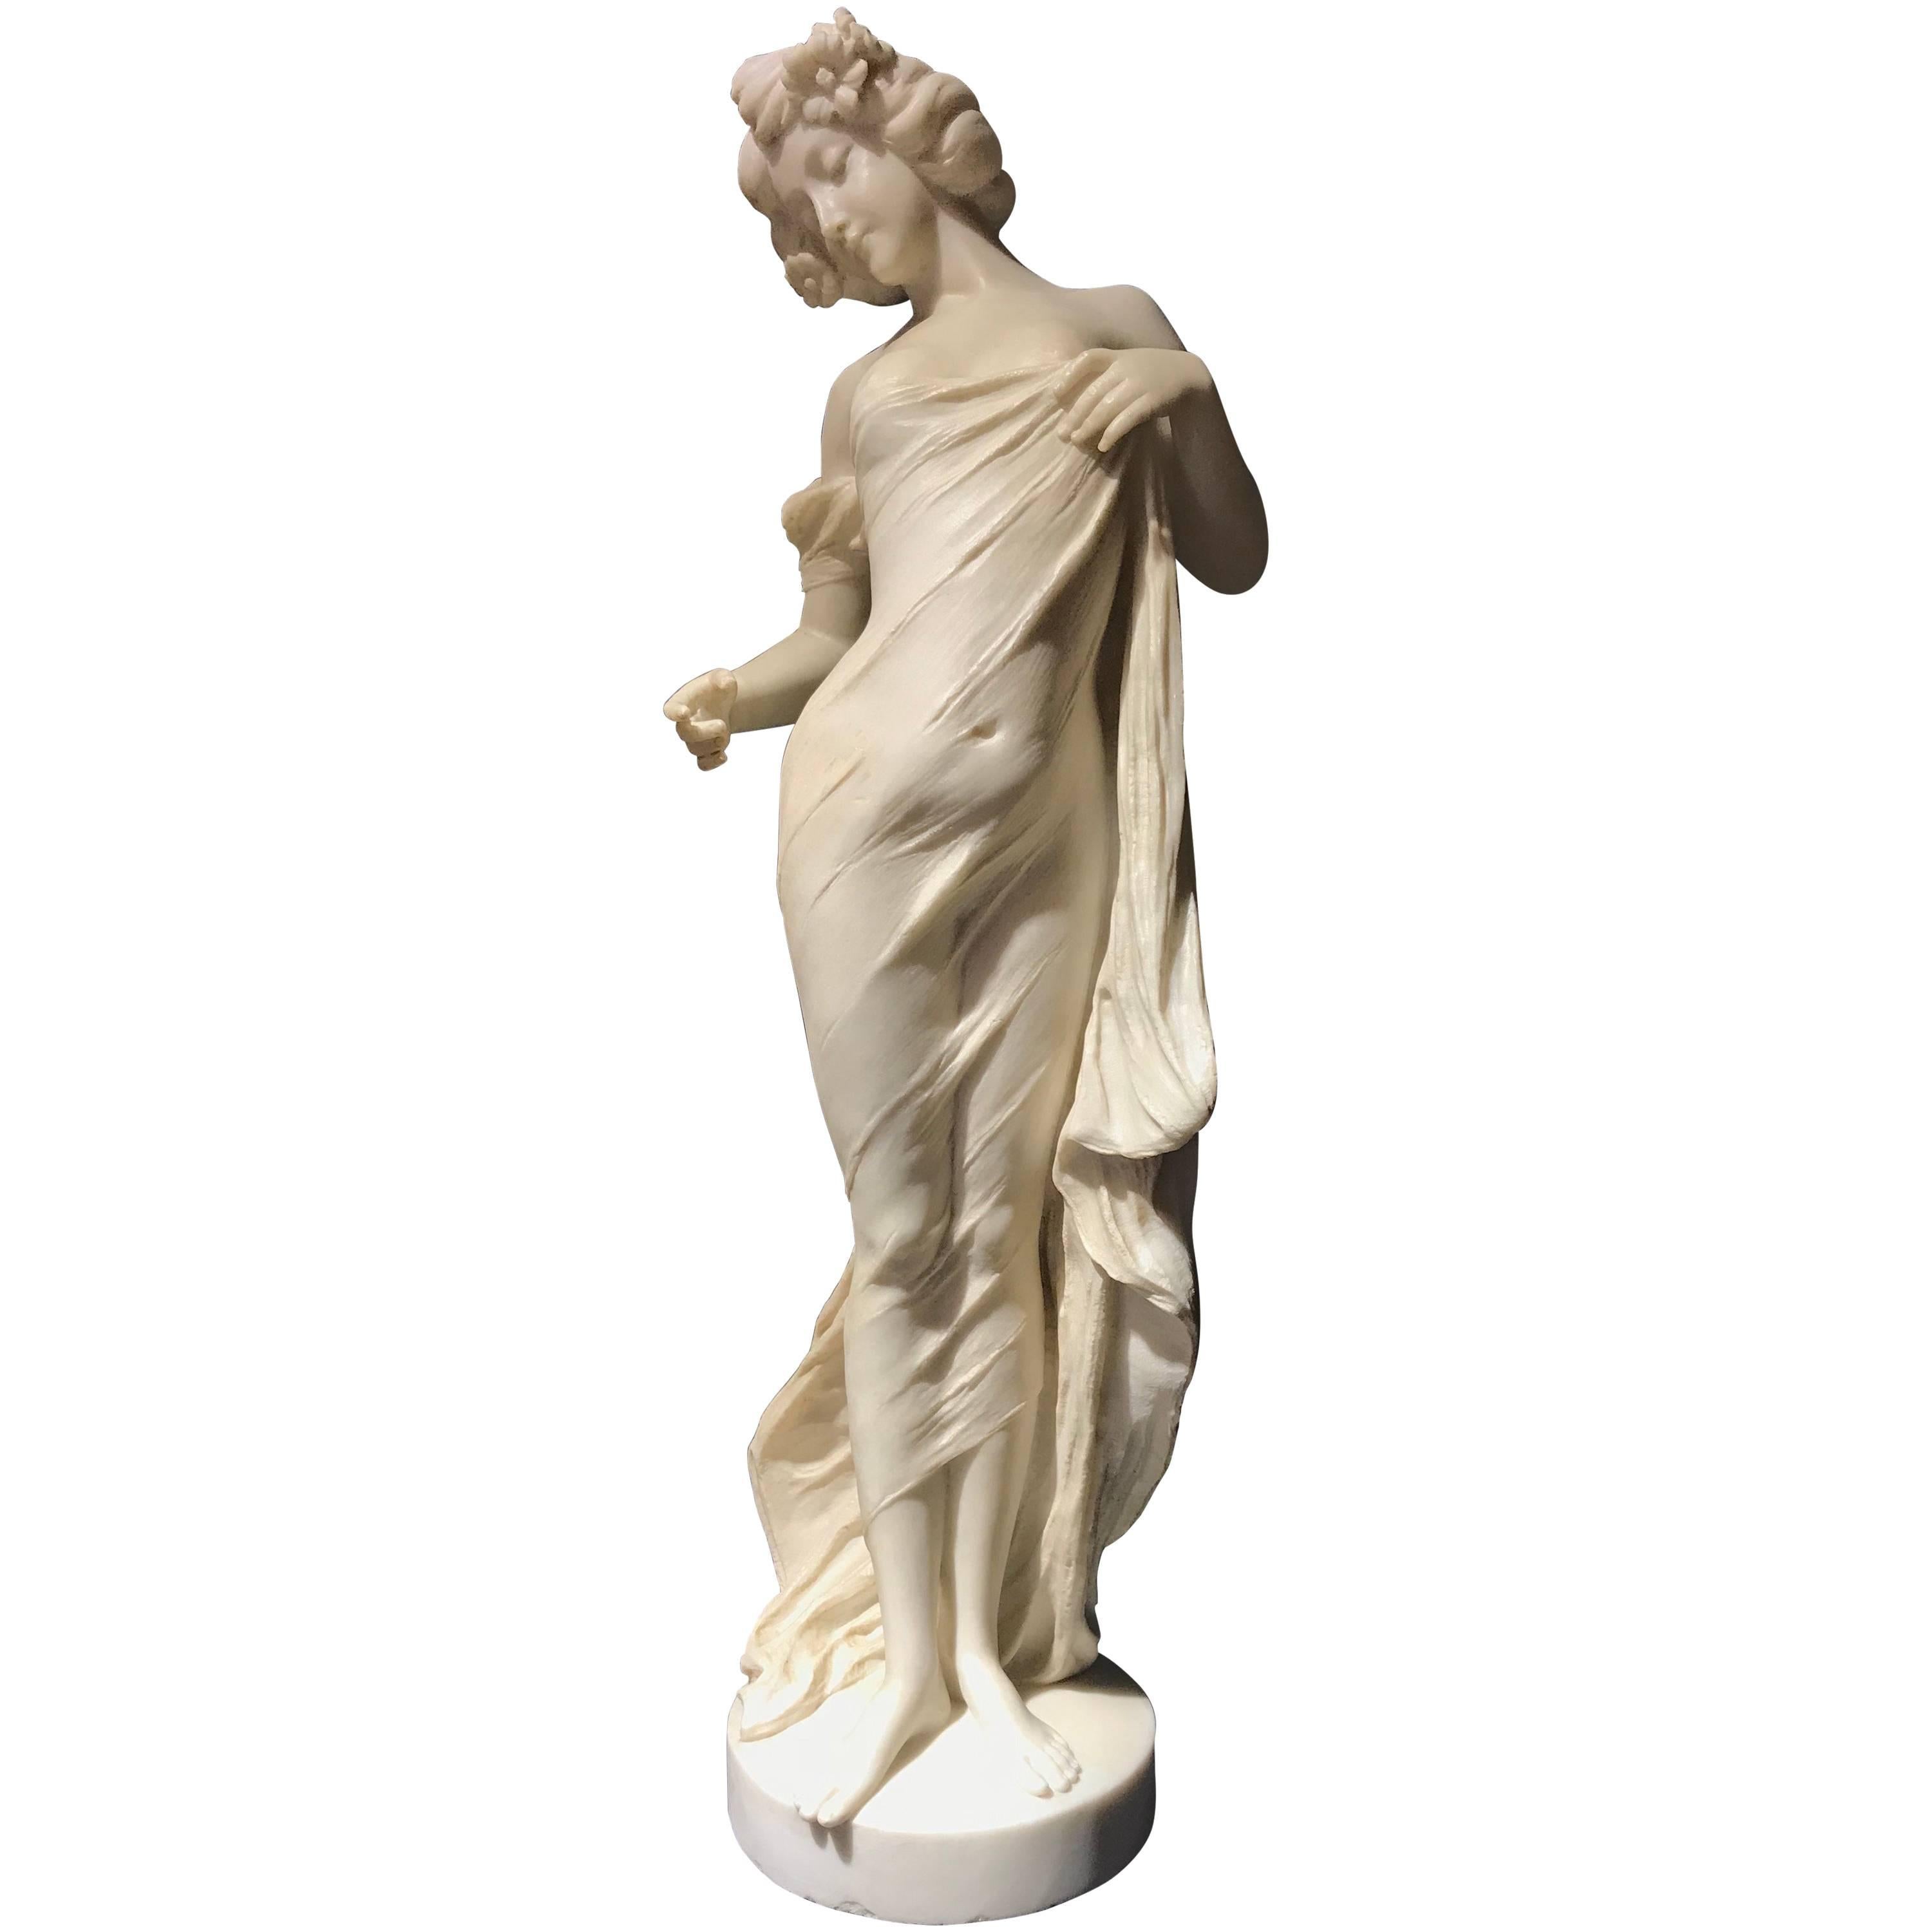 19th Century Neoclassical Italian White Marble Sculpture of Nymph